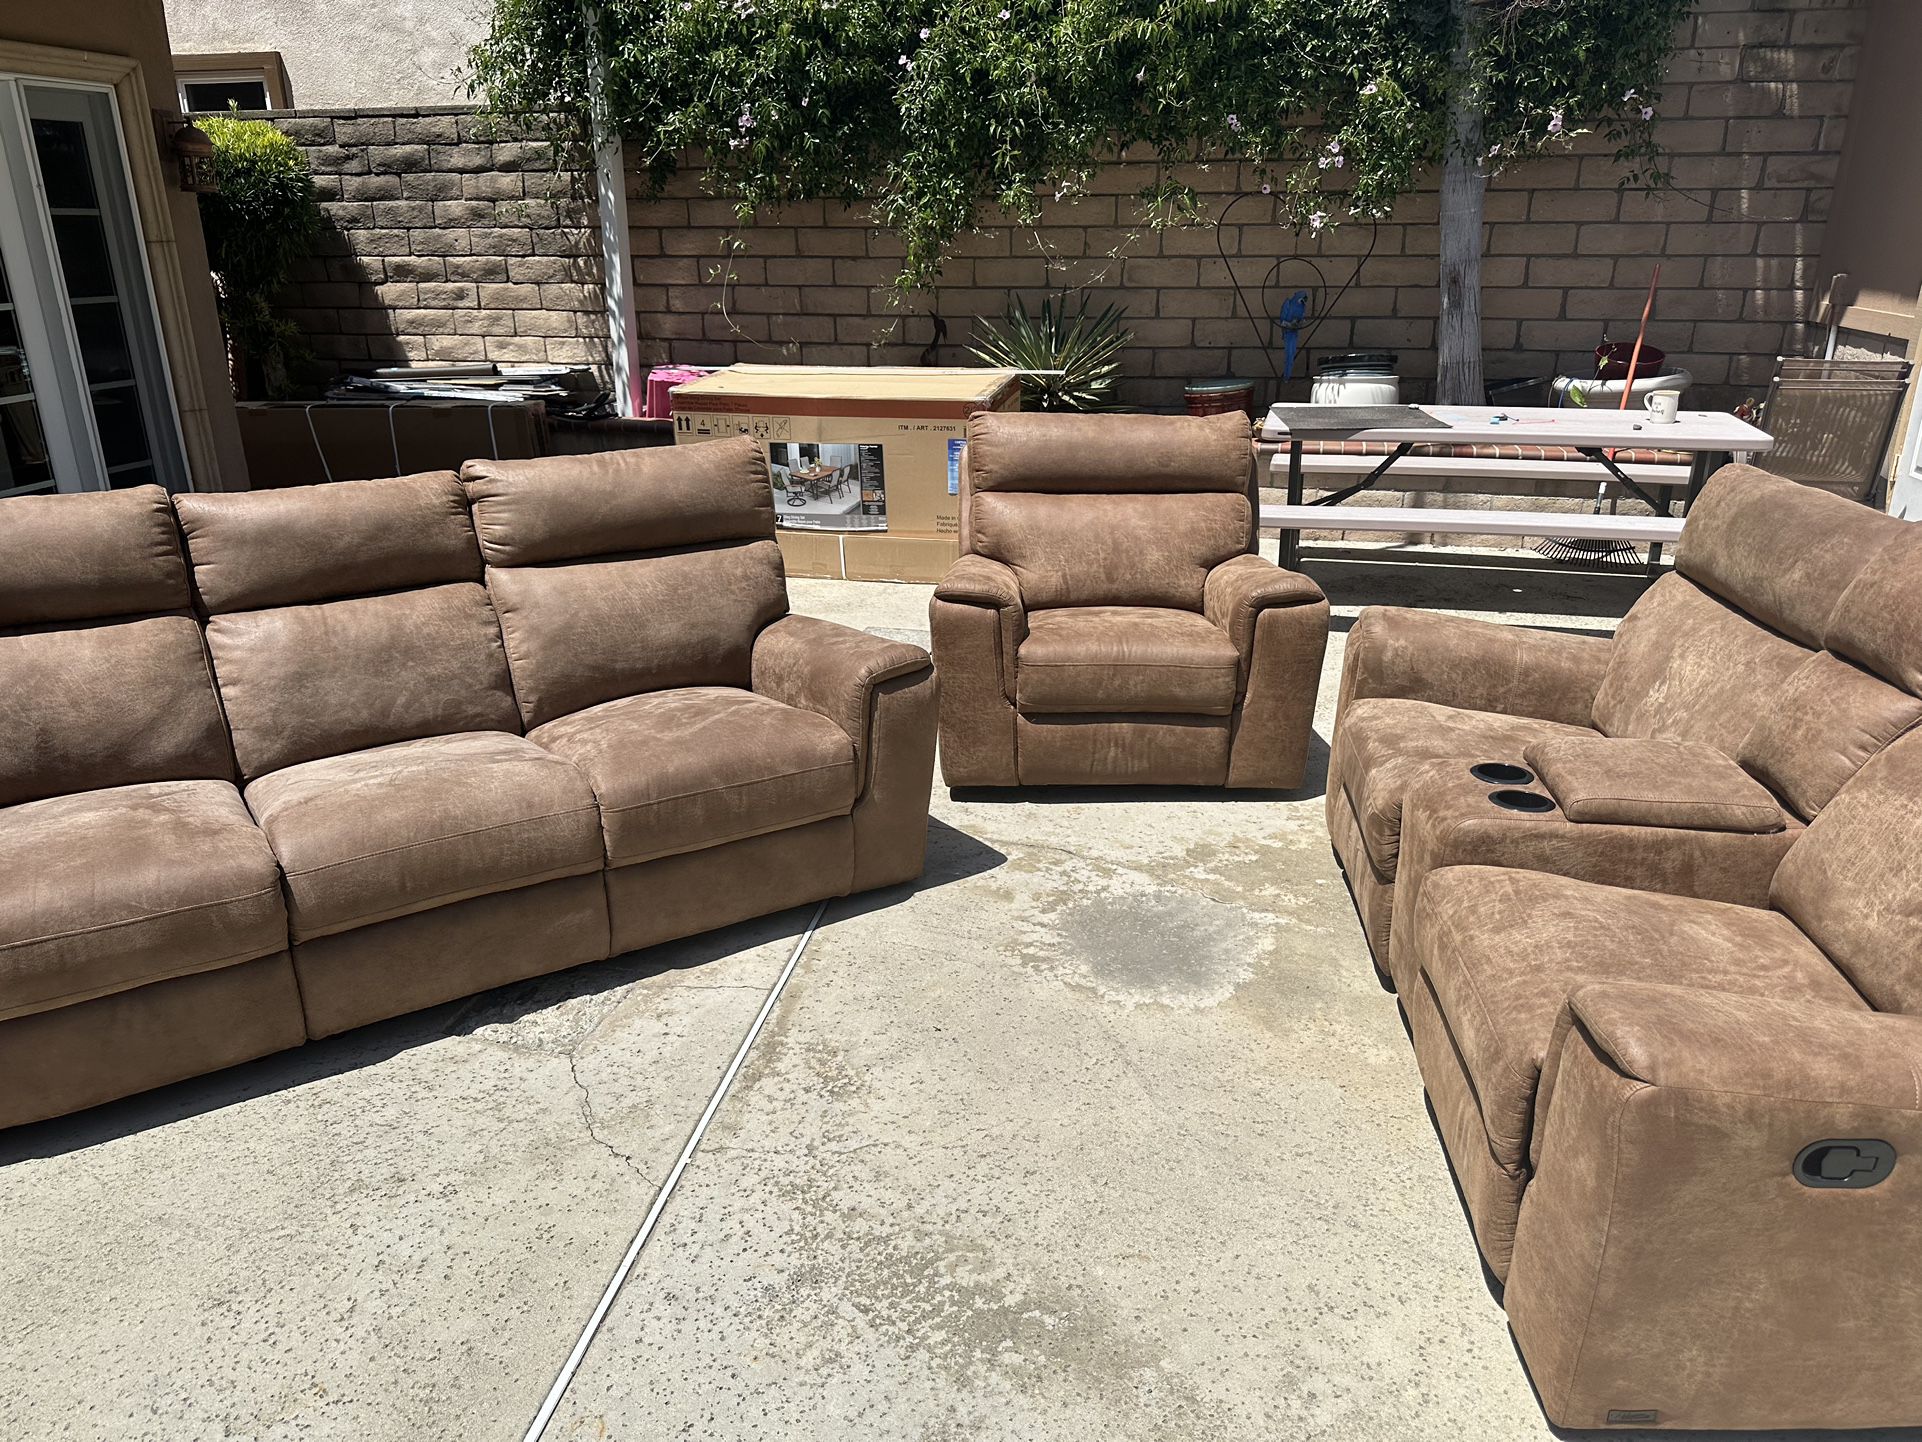 Microfiber/Suede Couches